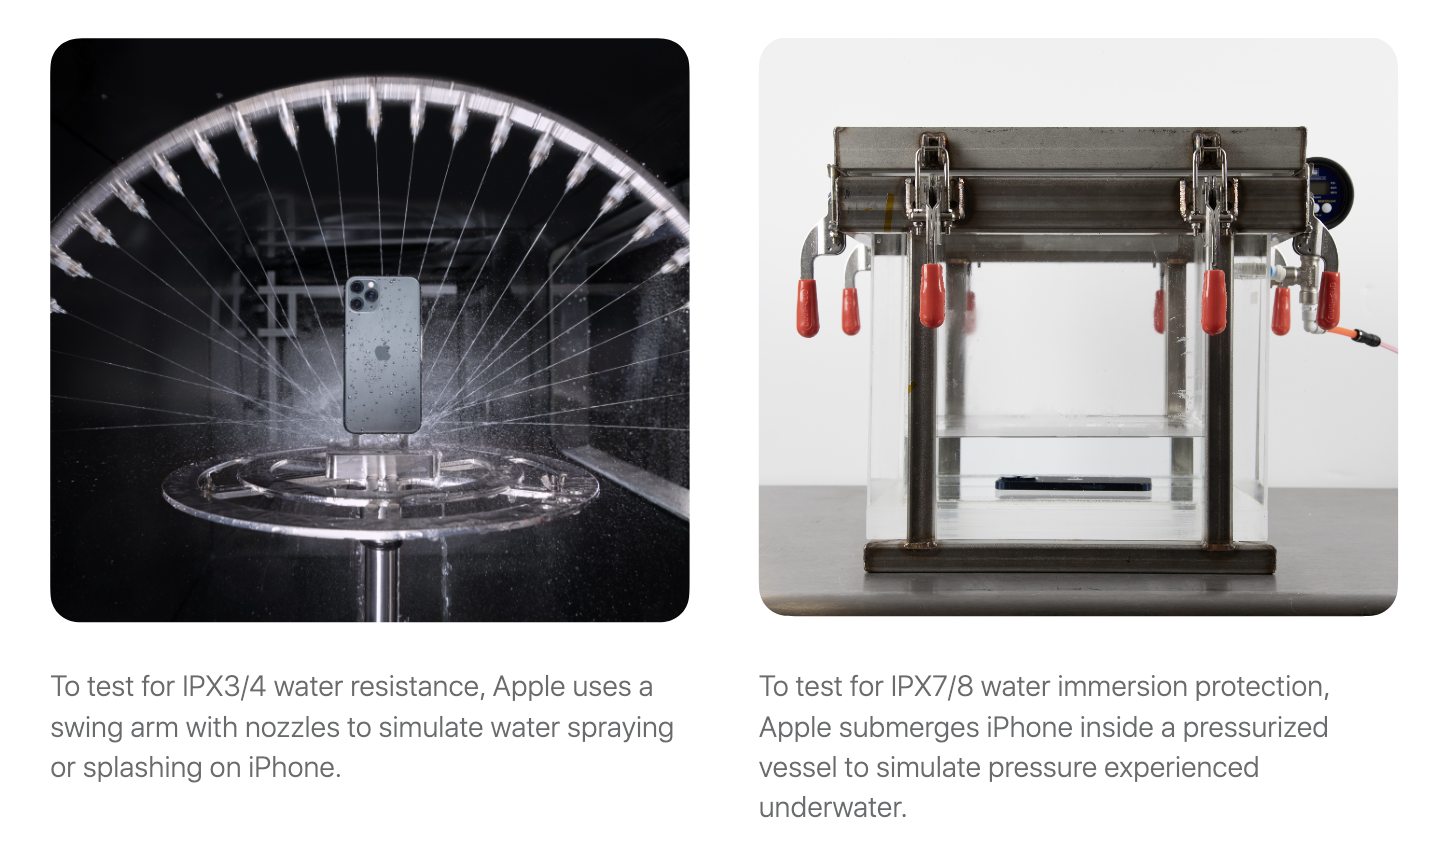 Photos from Apple's "Longevity, by Design" document showing the water ingress testing as part of its design.